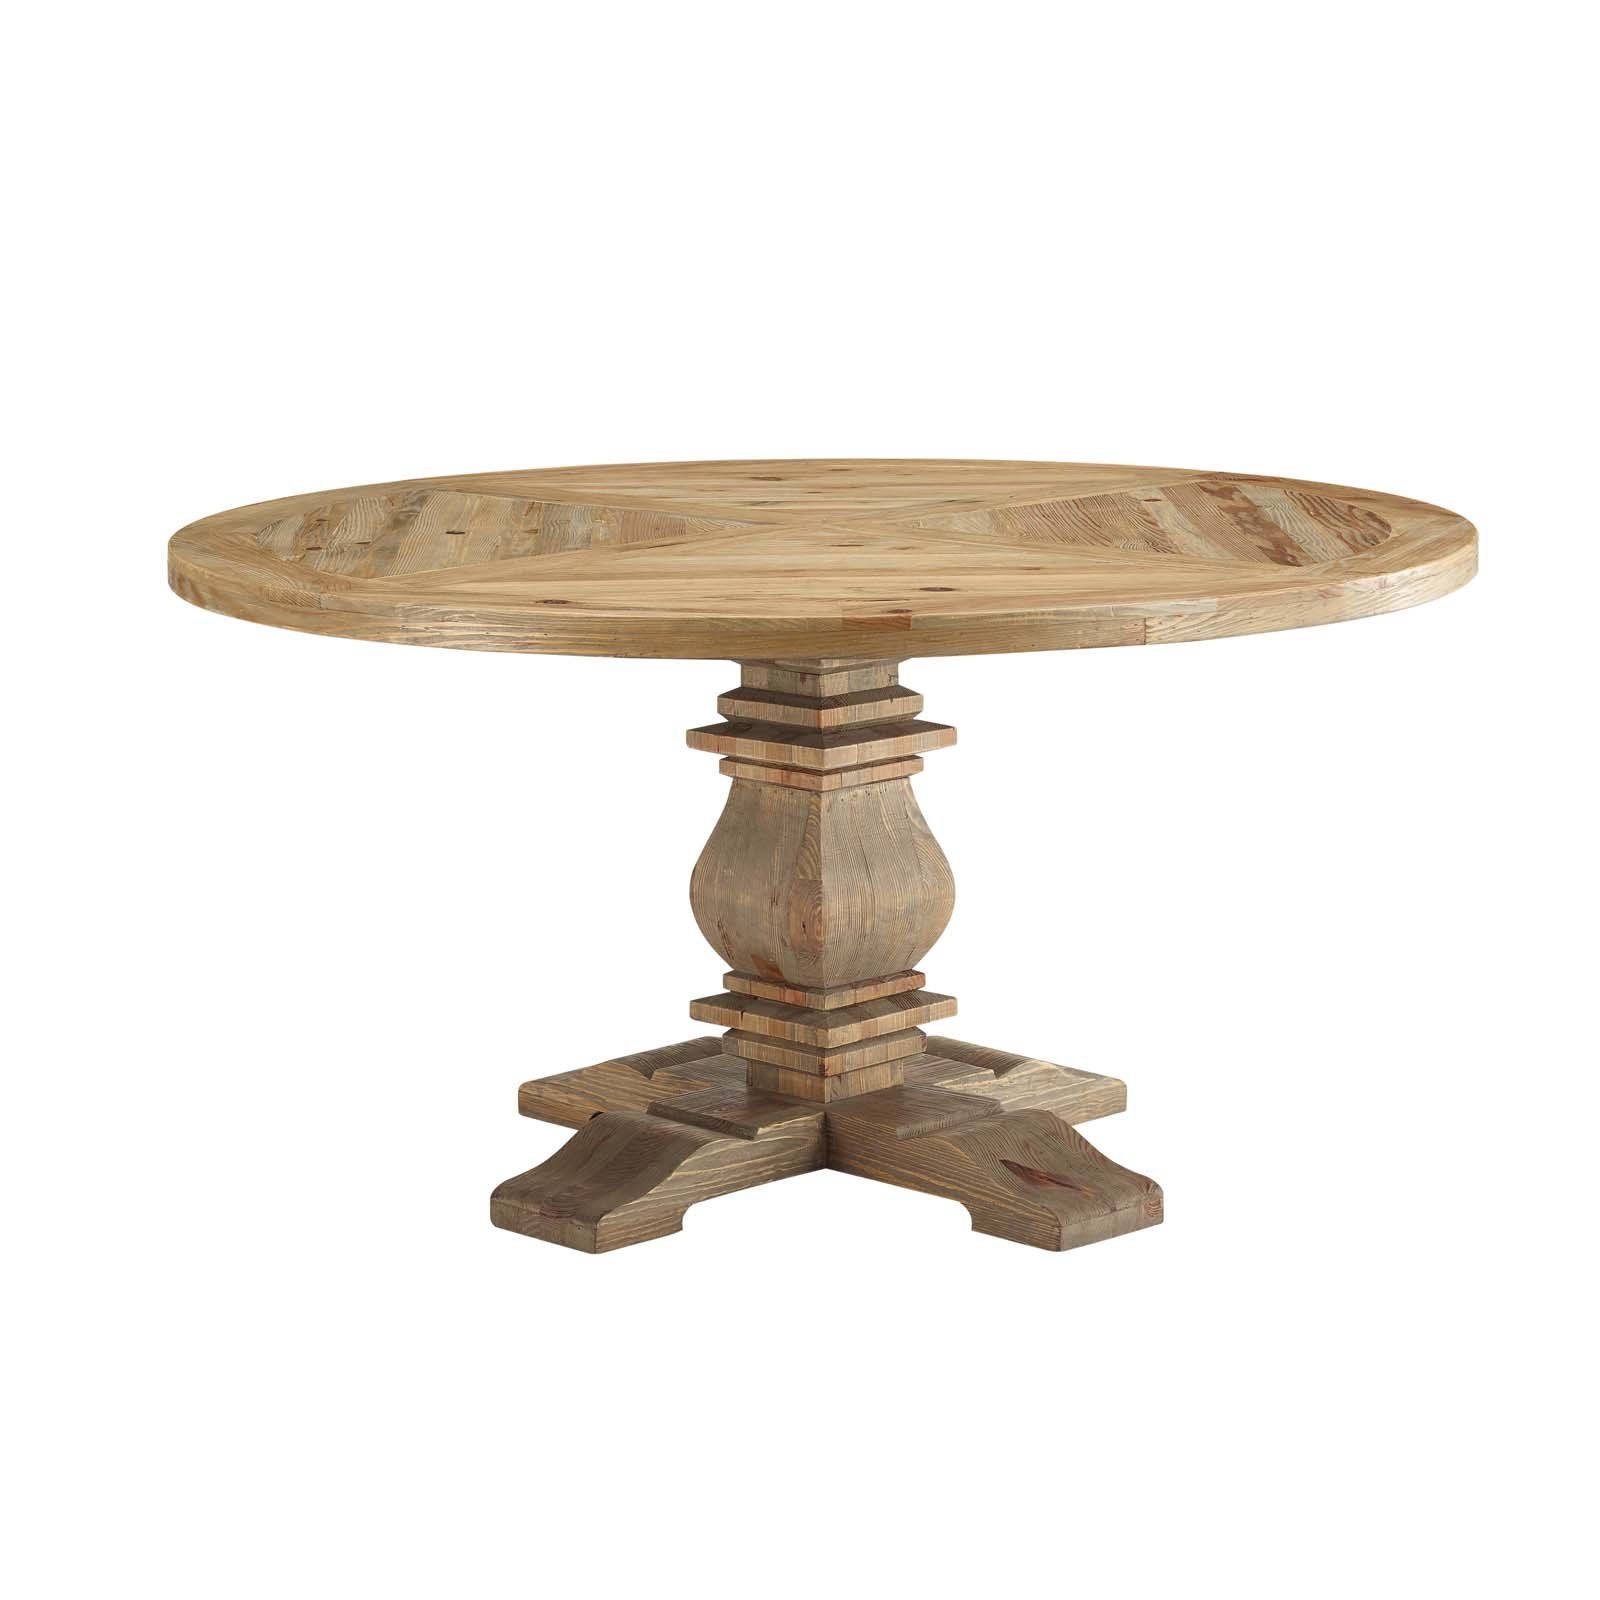 Column 59" Round Pine Wood Dining Table In 2019 | Products With Regard To Most Popular Montalvo Round Dining Tables (Photo 2 of 25)